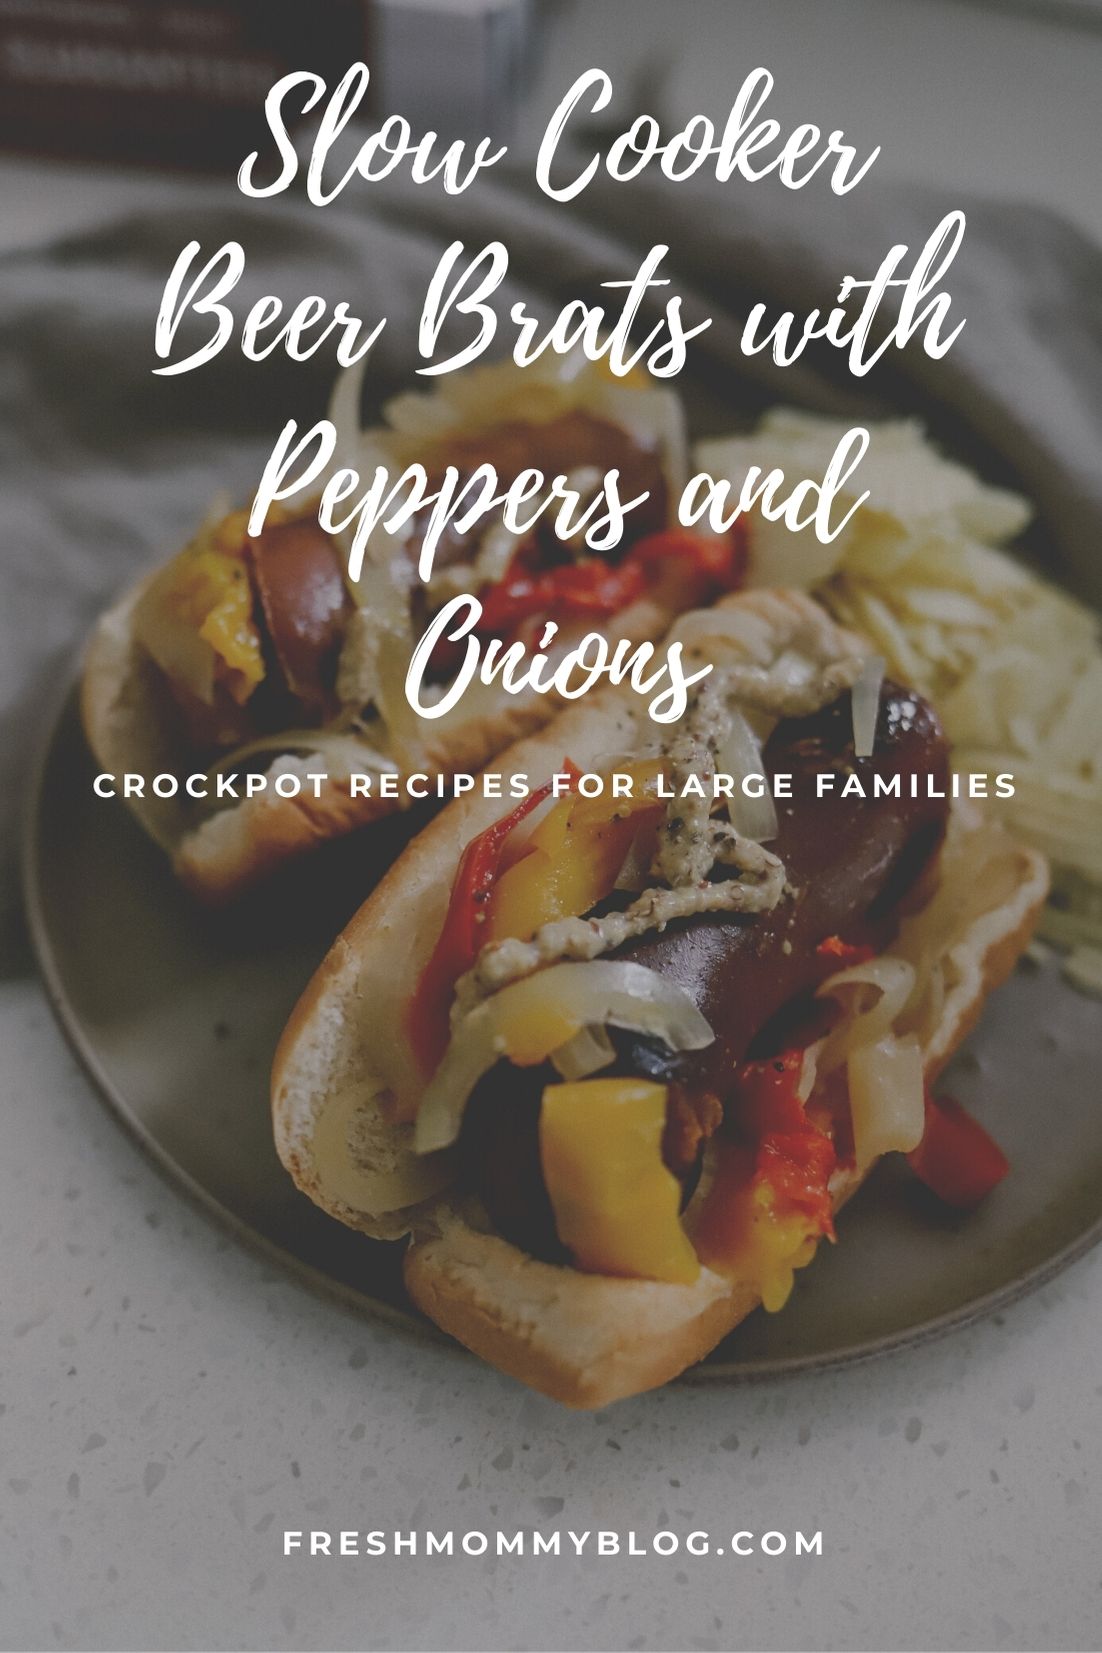 Whether it's game day or just a simple crockpot meal for easy weeknight eating, these Slow Cooker Beer Brats are a tasty winner! Slow-cooked for one of the most flavorful, juicy brats you've ever had and perfect on top of a bun, sliced over noodles, or eaten all on its own.